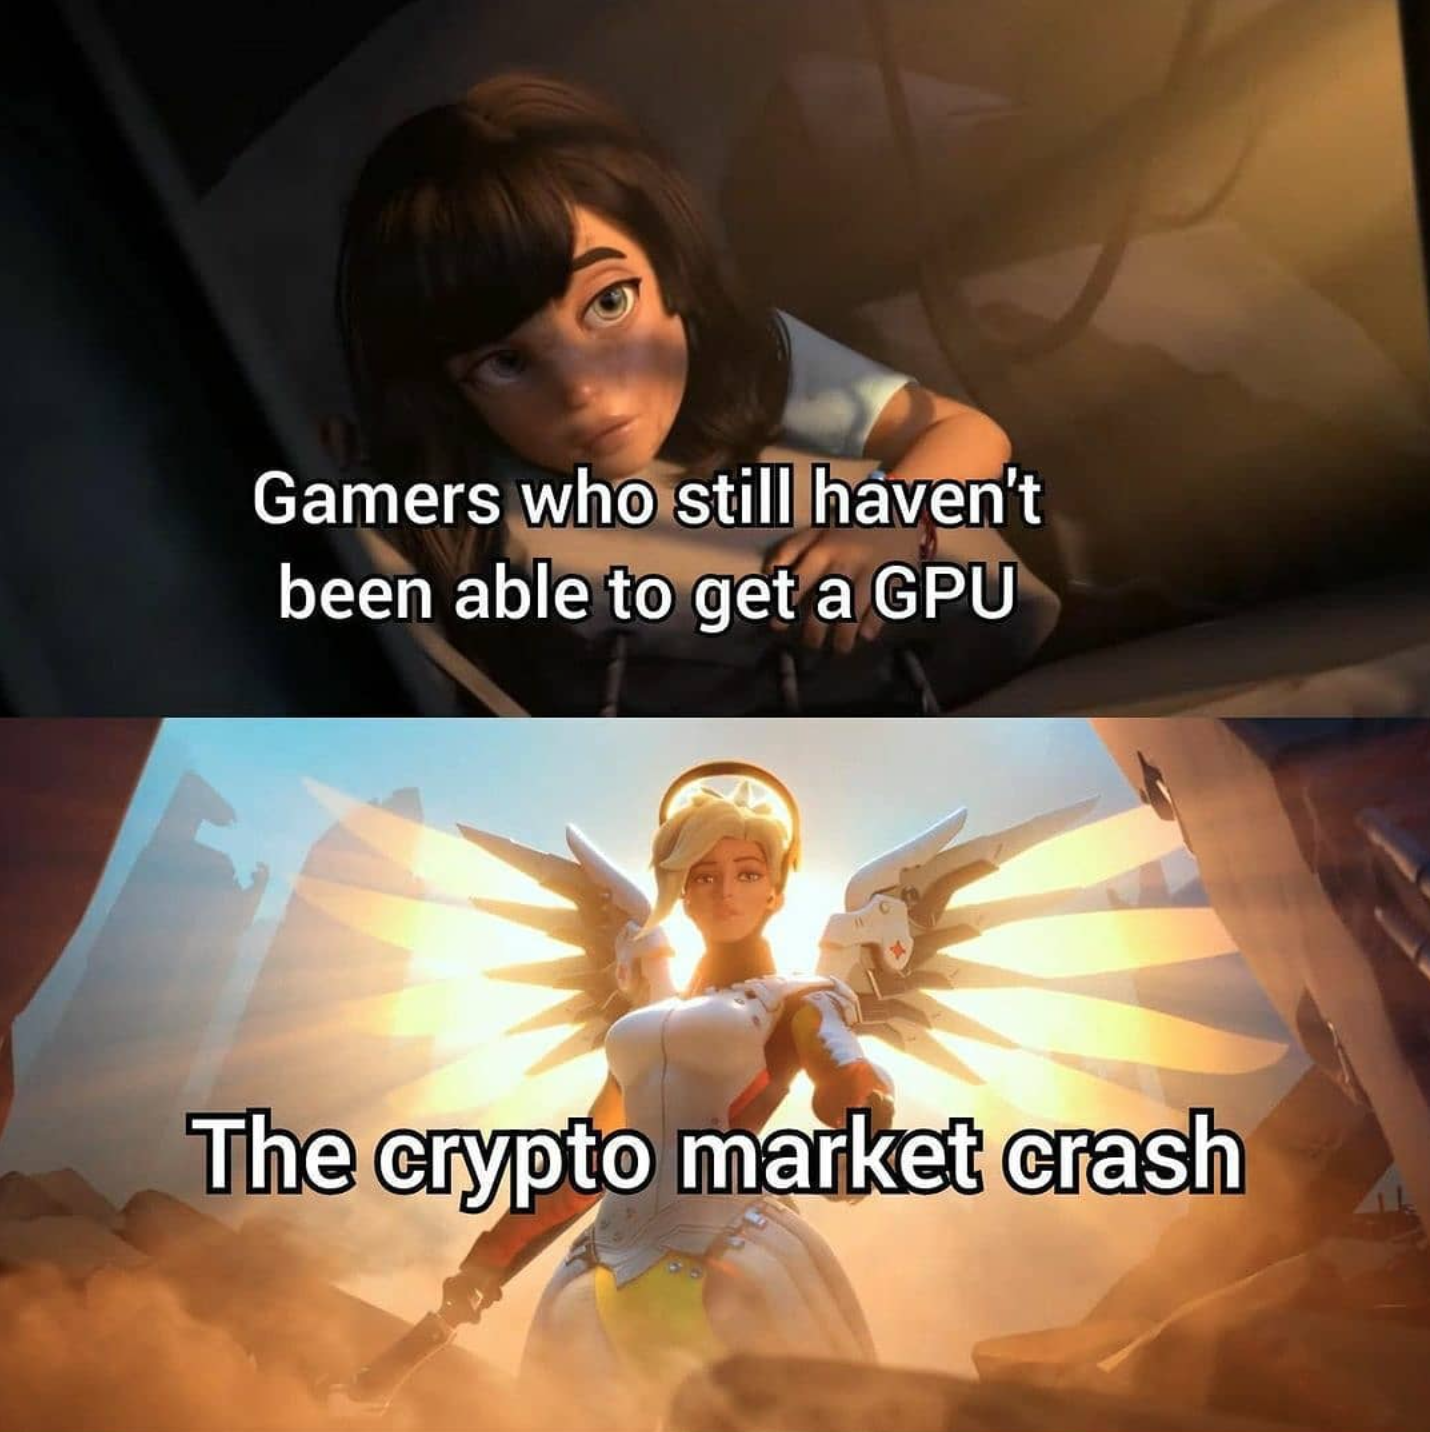 funny gaming memes - overwatch mercy meme template - Gamers who still haven't been able to get a Gpu The crypto market crash